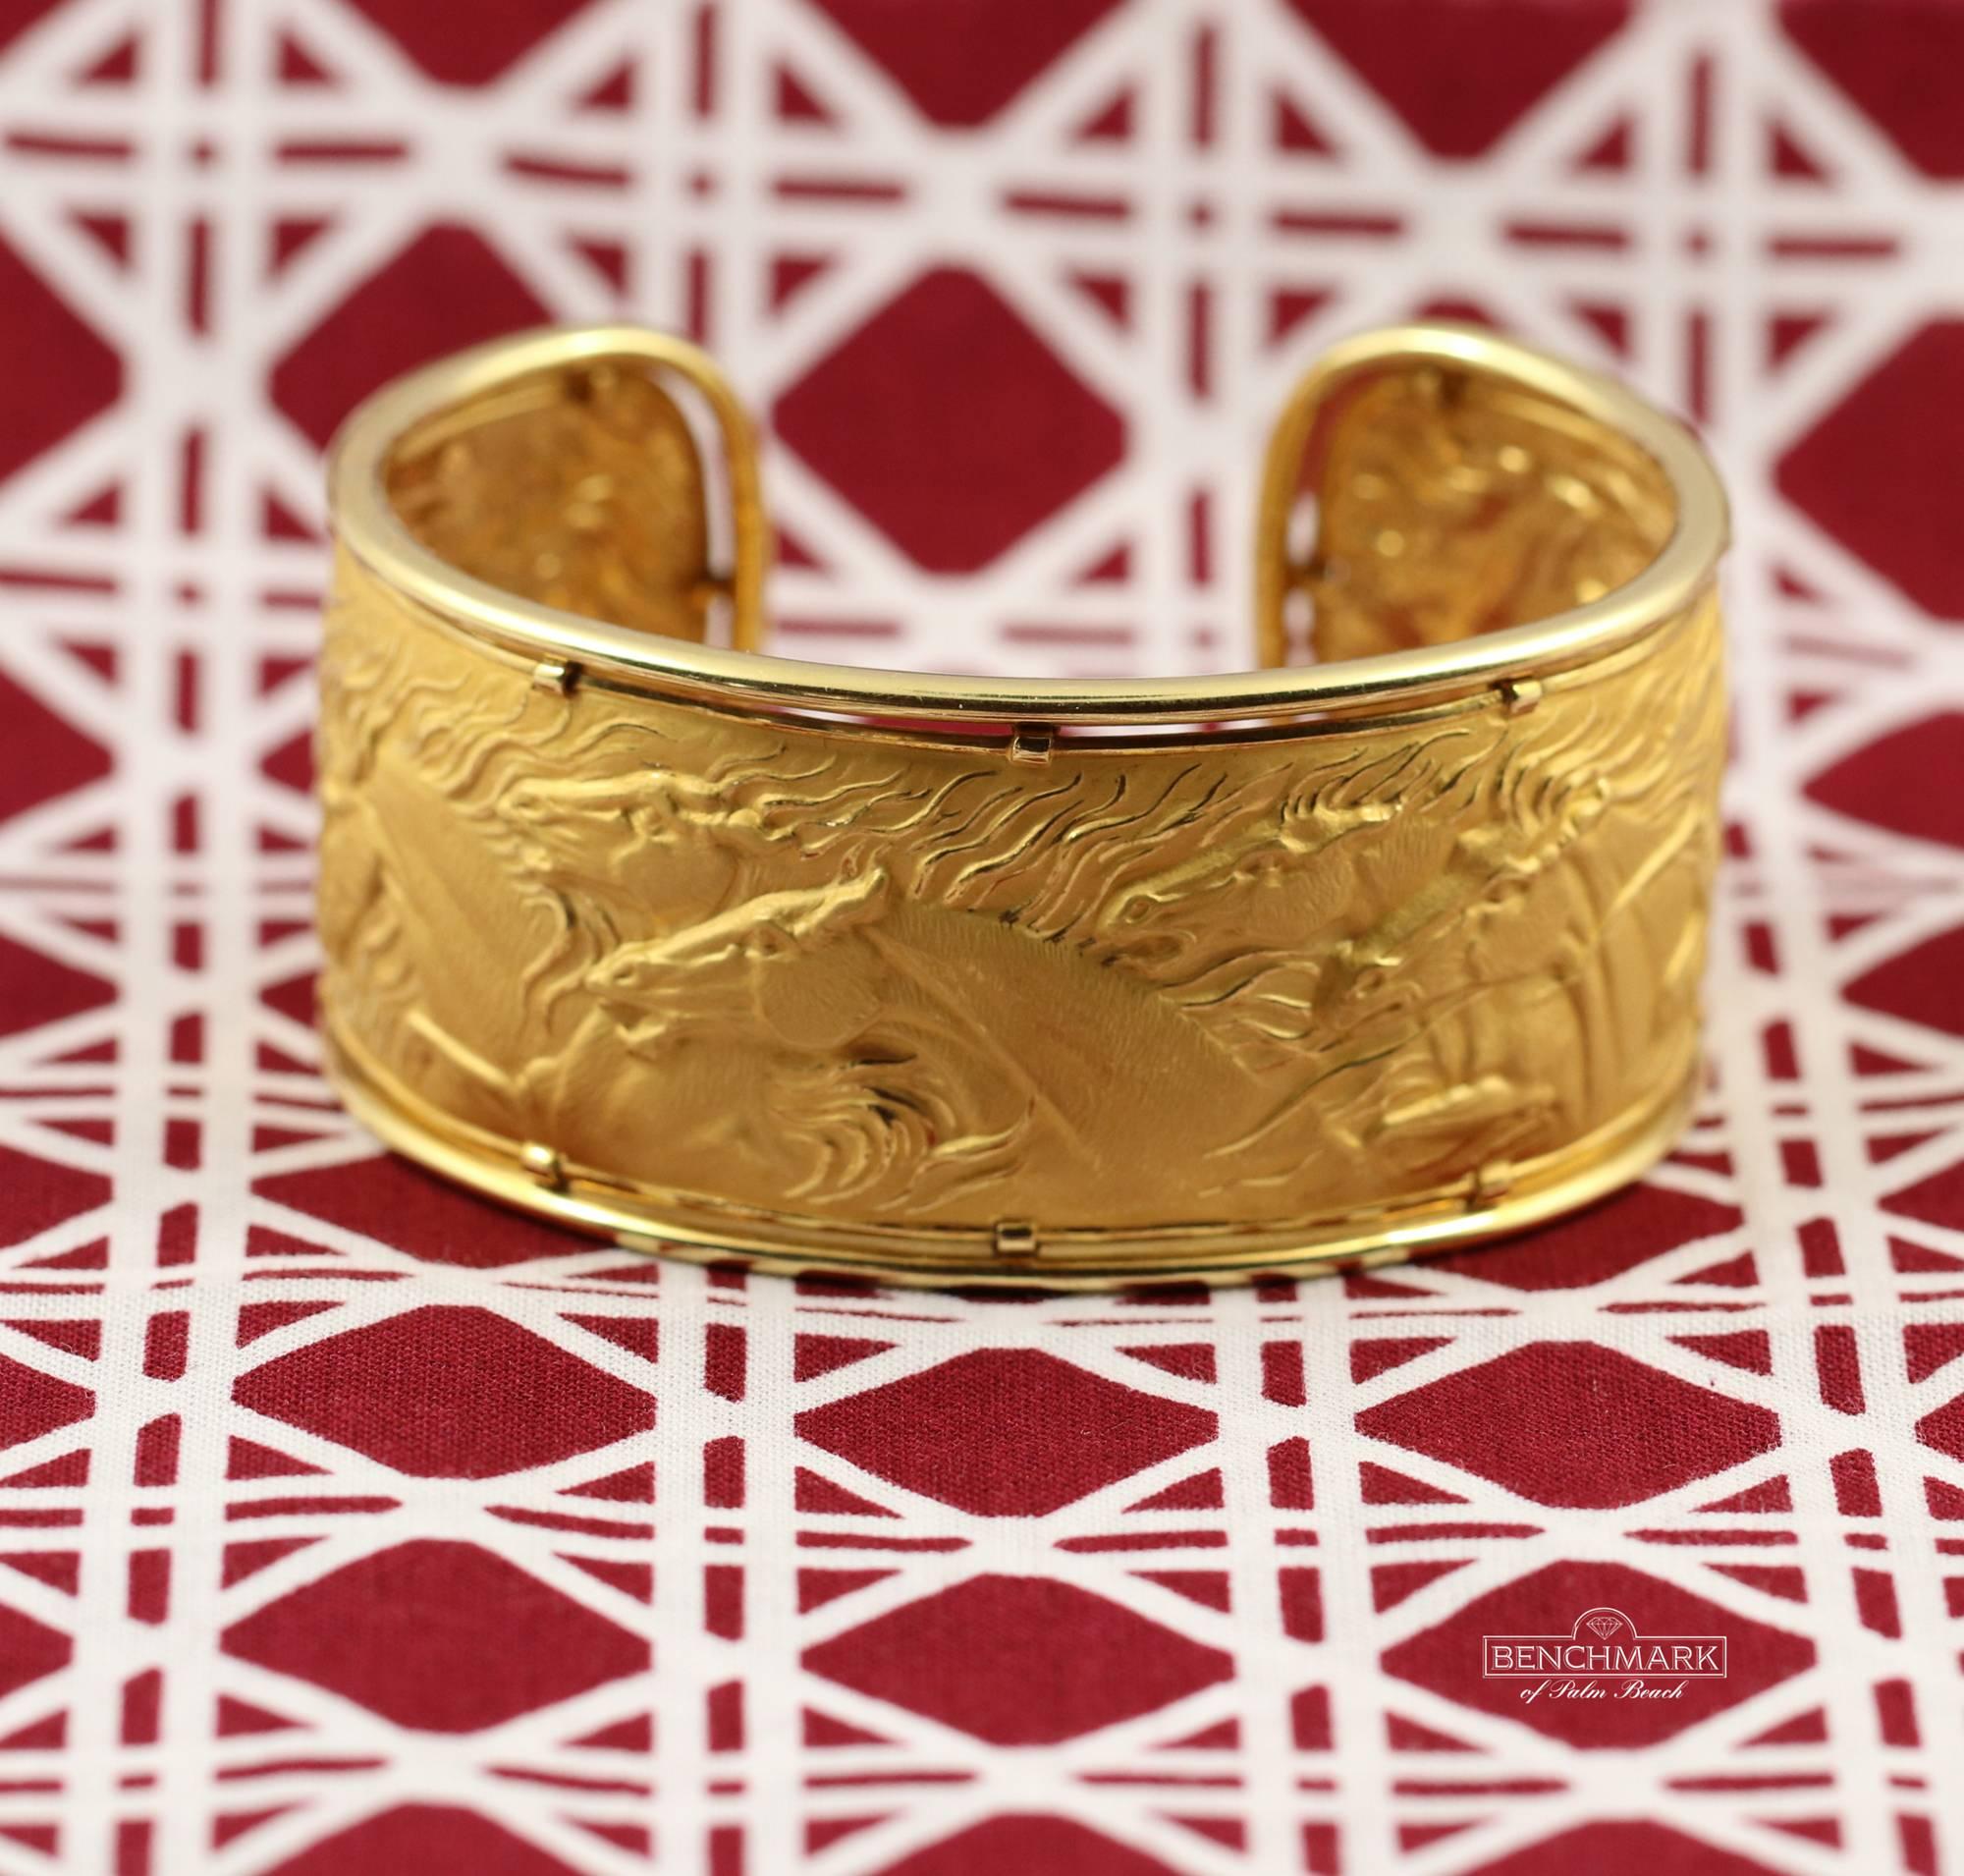 An 18 karat yellow gold bracelet framed in high polish gold, with seven galloping horses in the center. Masterfully textured and with great relief, the horses appear to gallop. Measuring 1 1/8 inches wide it will comfortably fit wrists up to 6 1/2